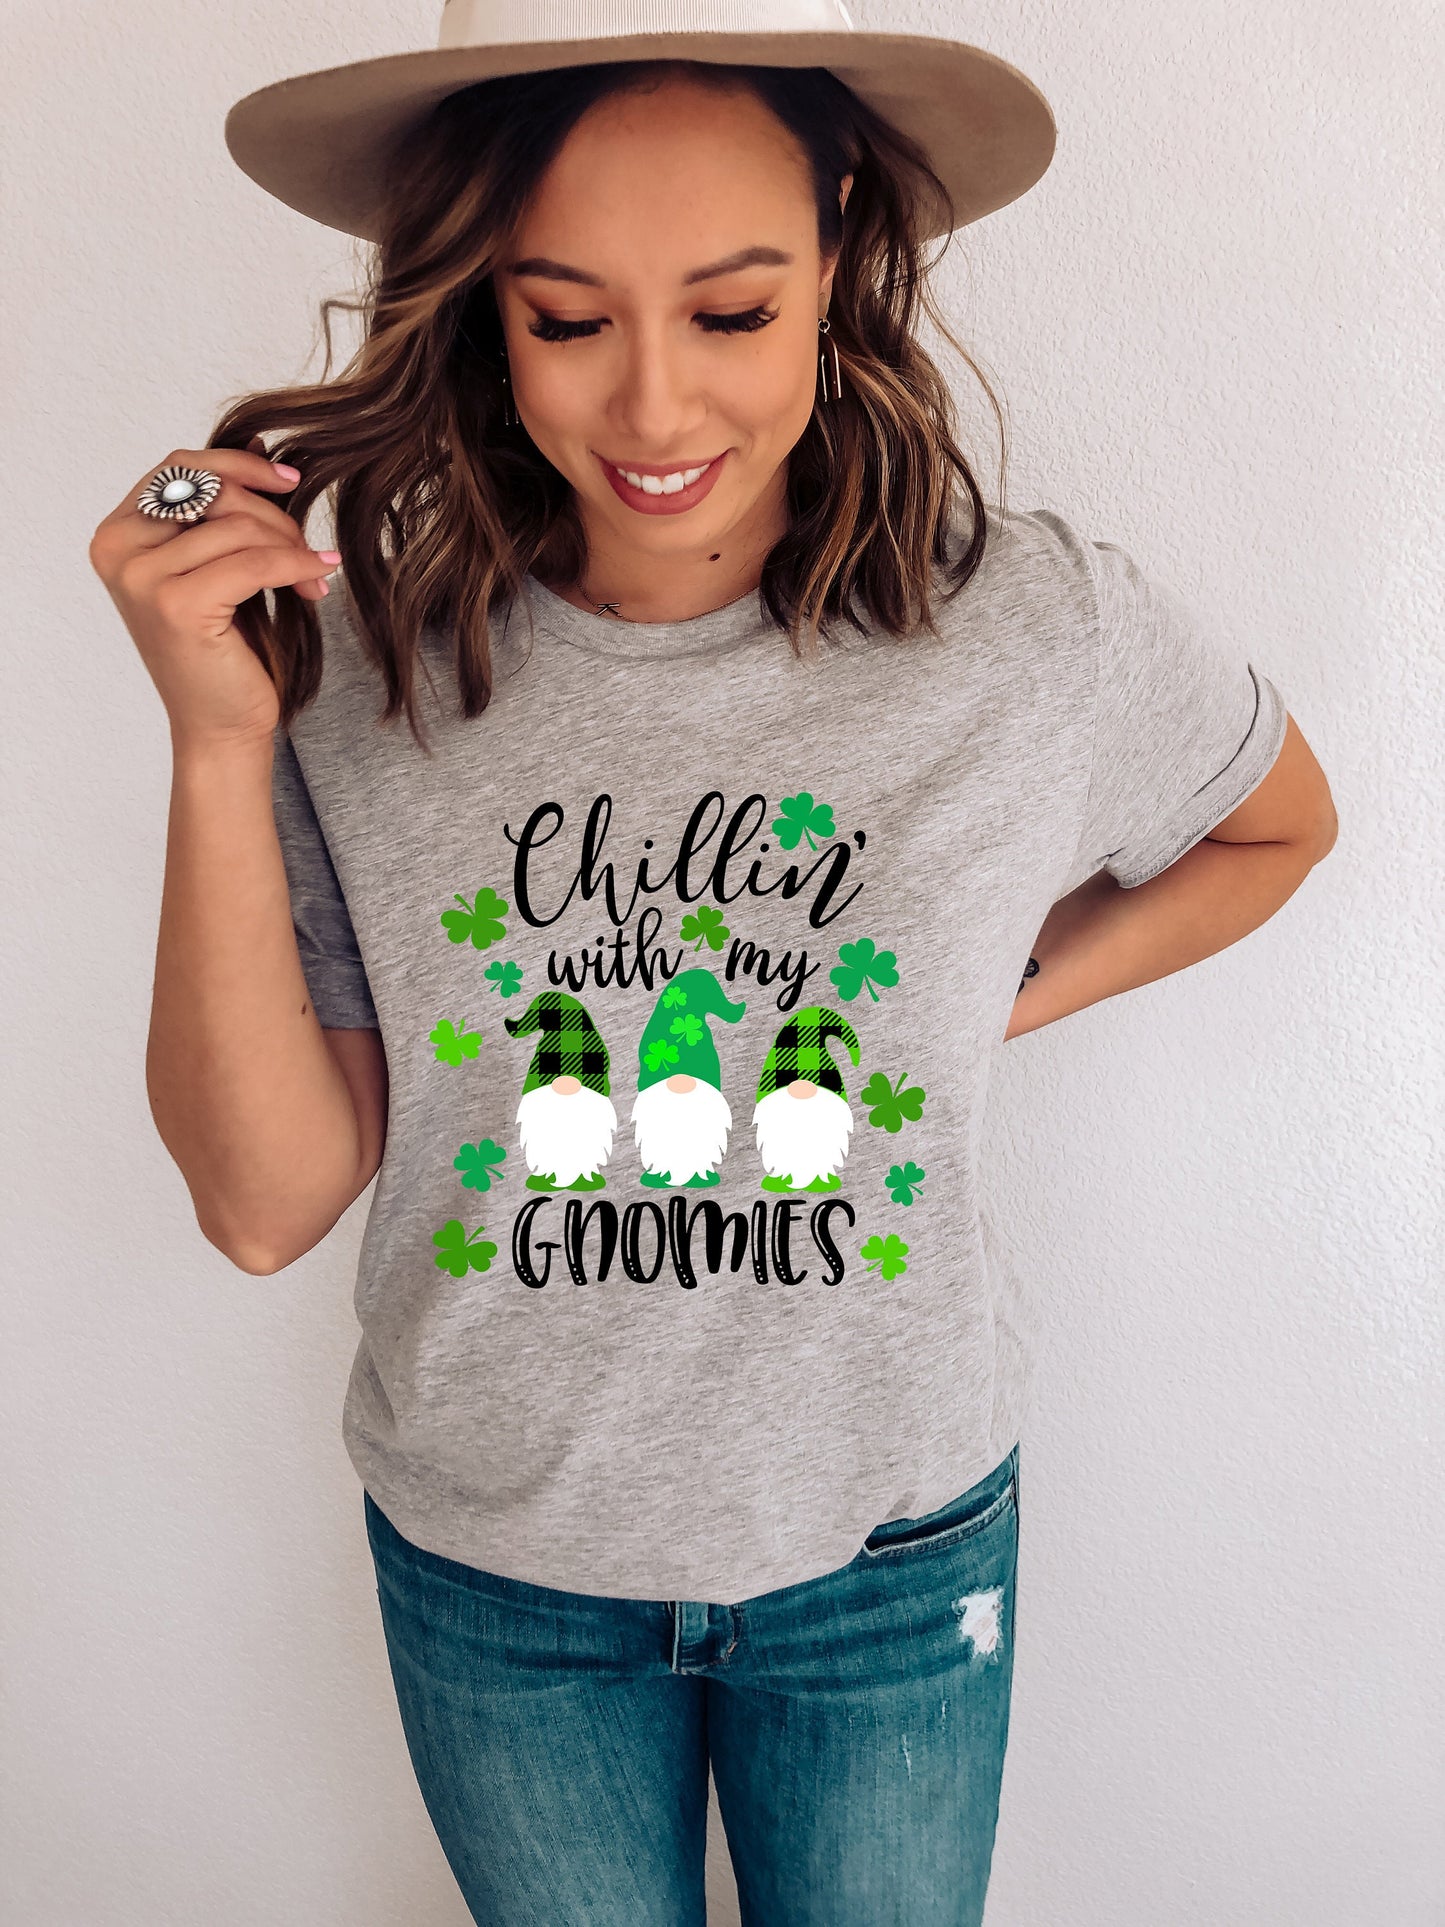 Chillin' With My Gnomies - Women's St. Patrick's Day Shirt